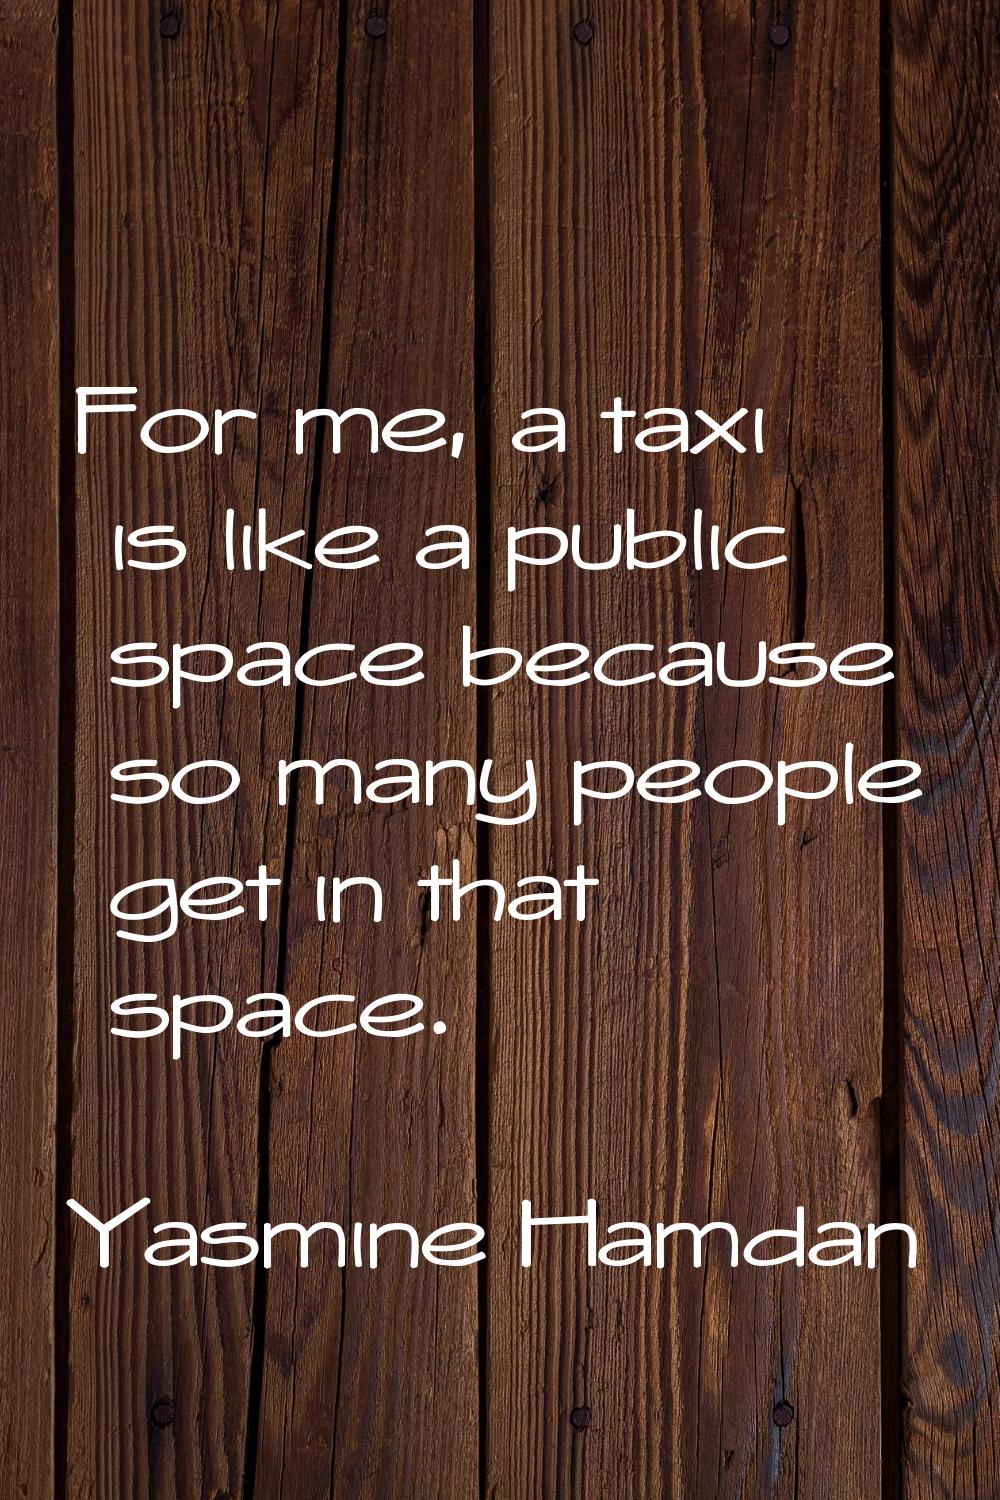 For me, a taxi is like a public space because so many people get in that space.